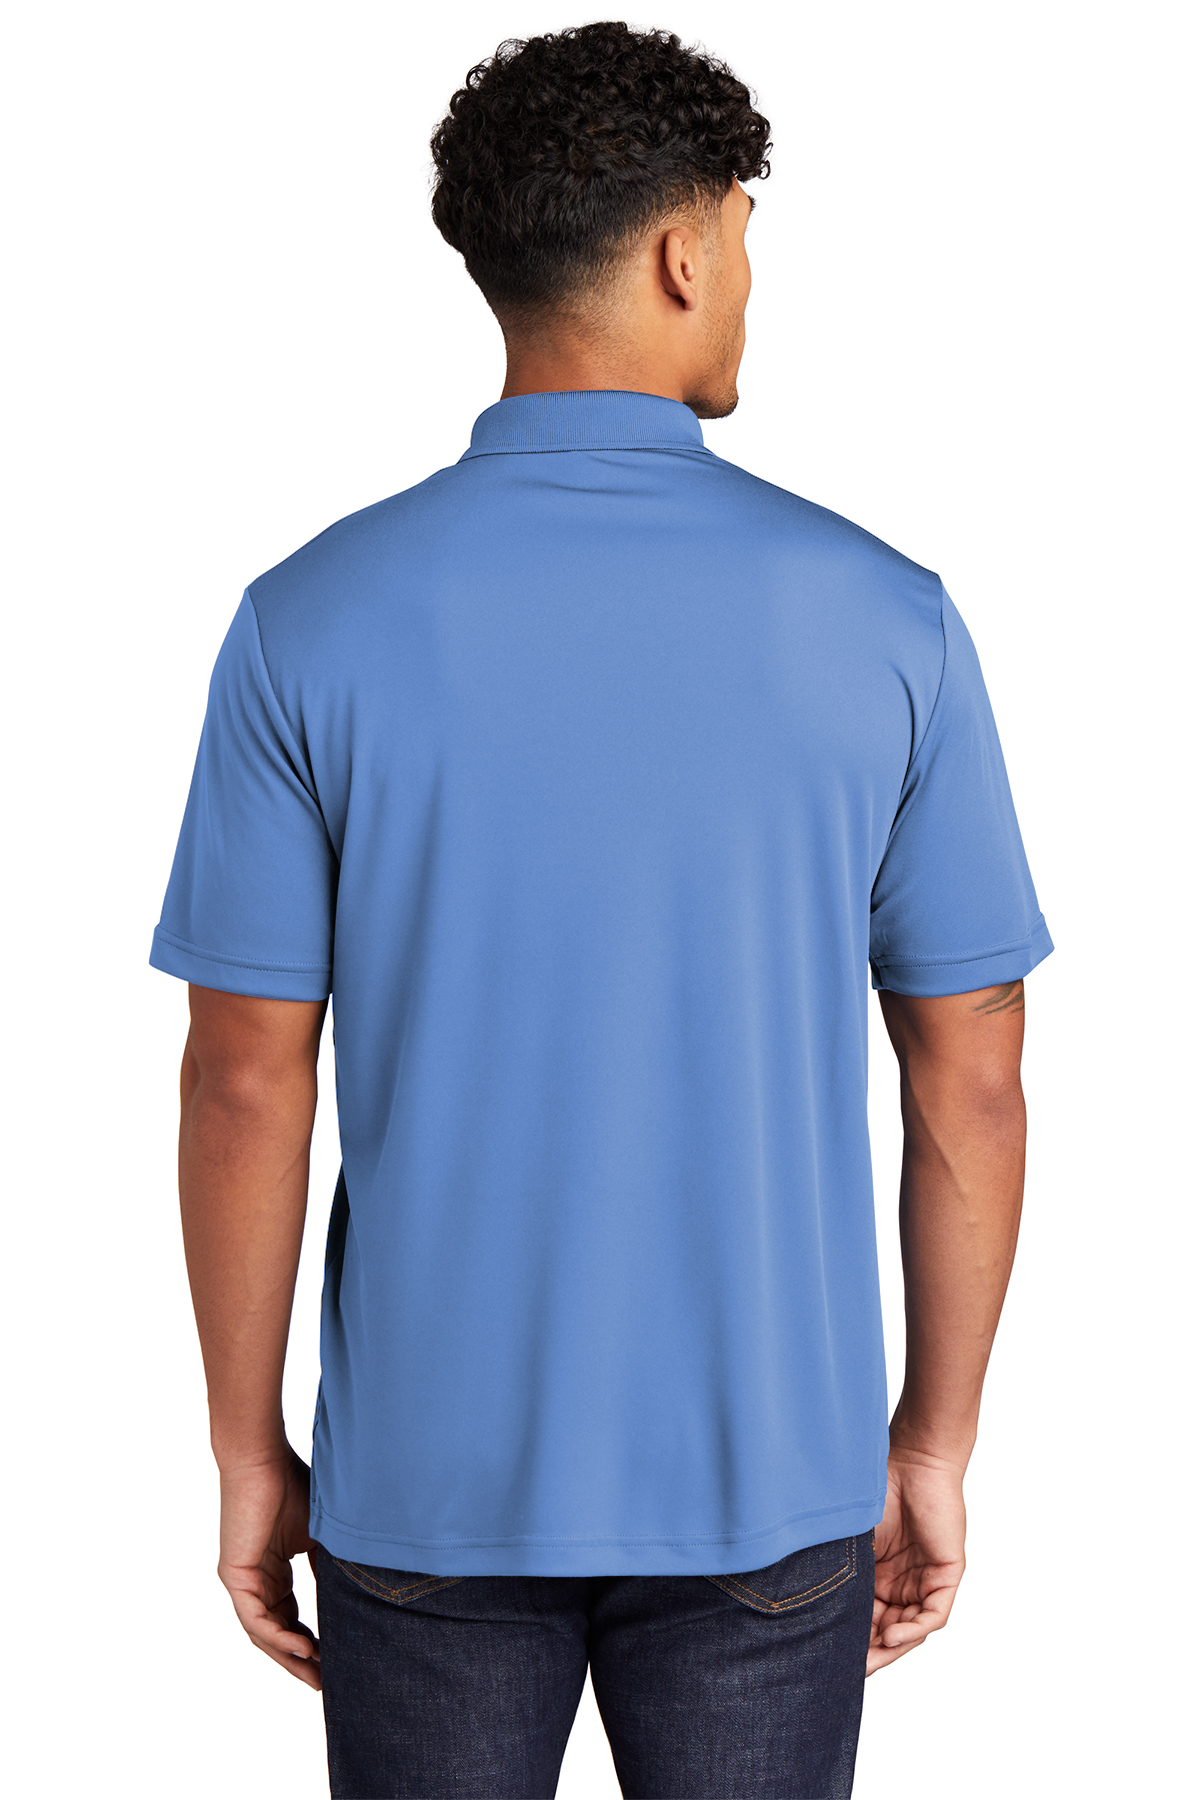 Sport-Tek PosiCharge Competitor Polo | Product | SanMar